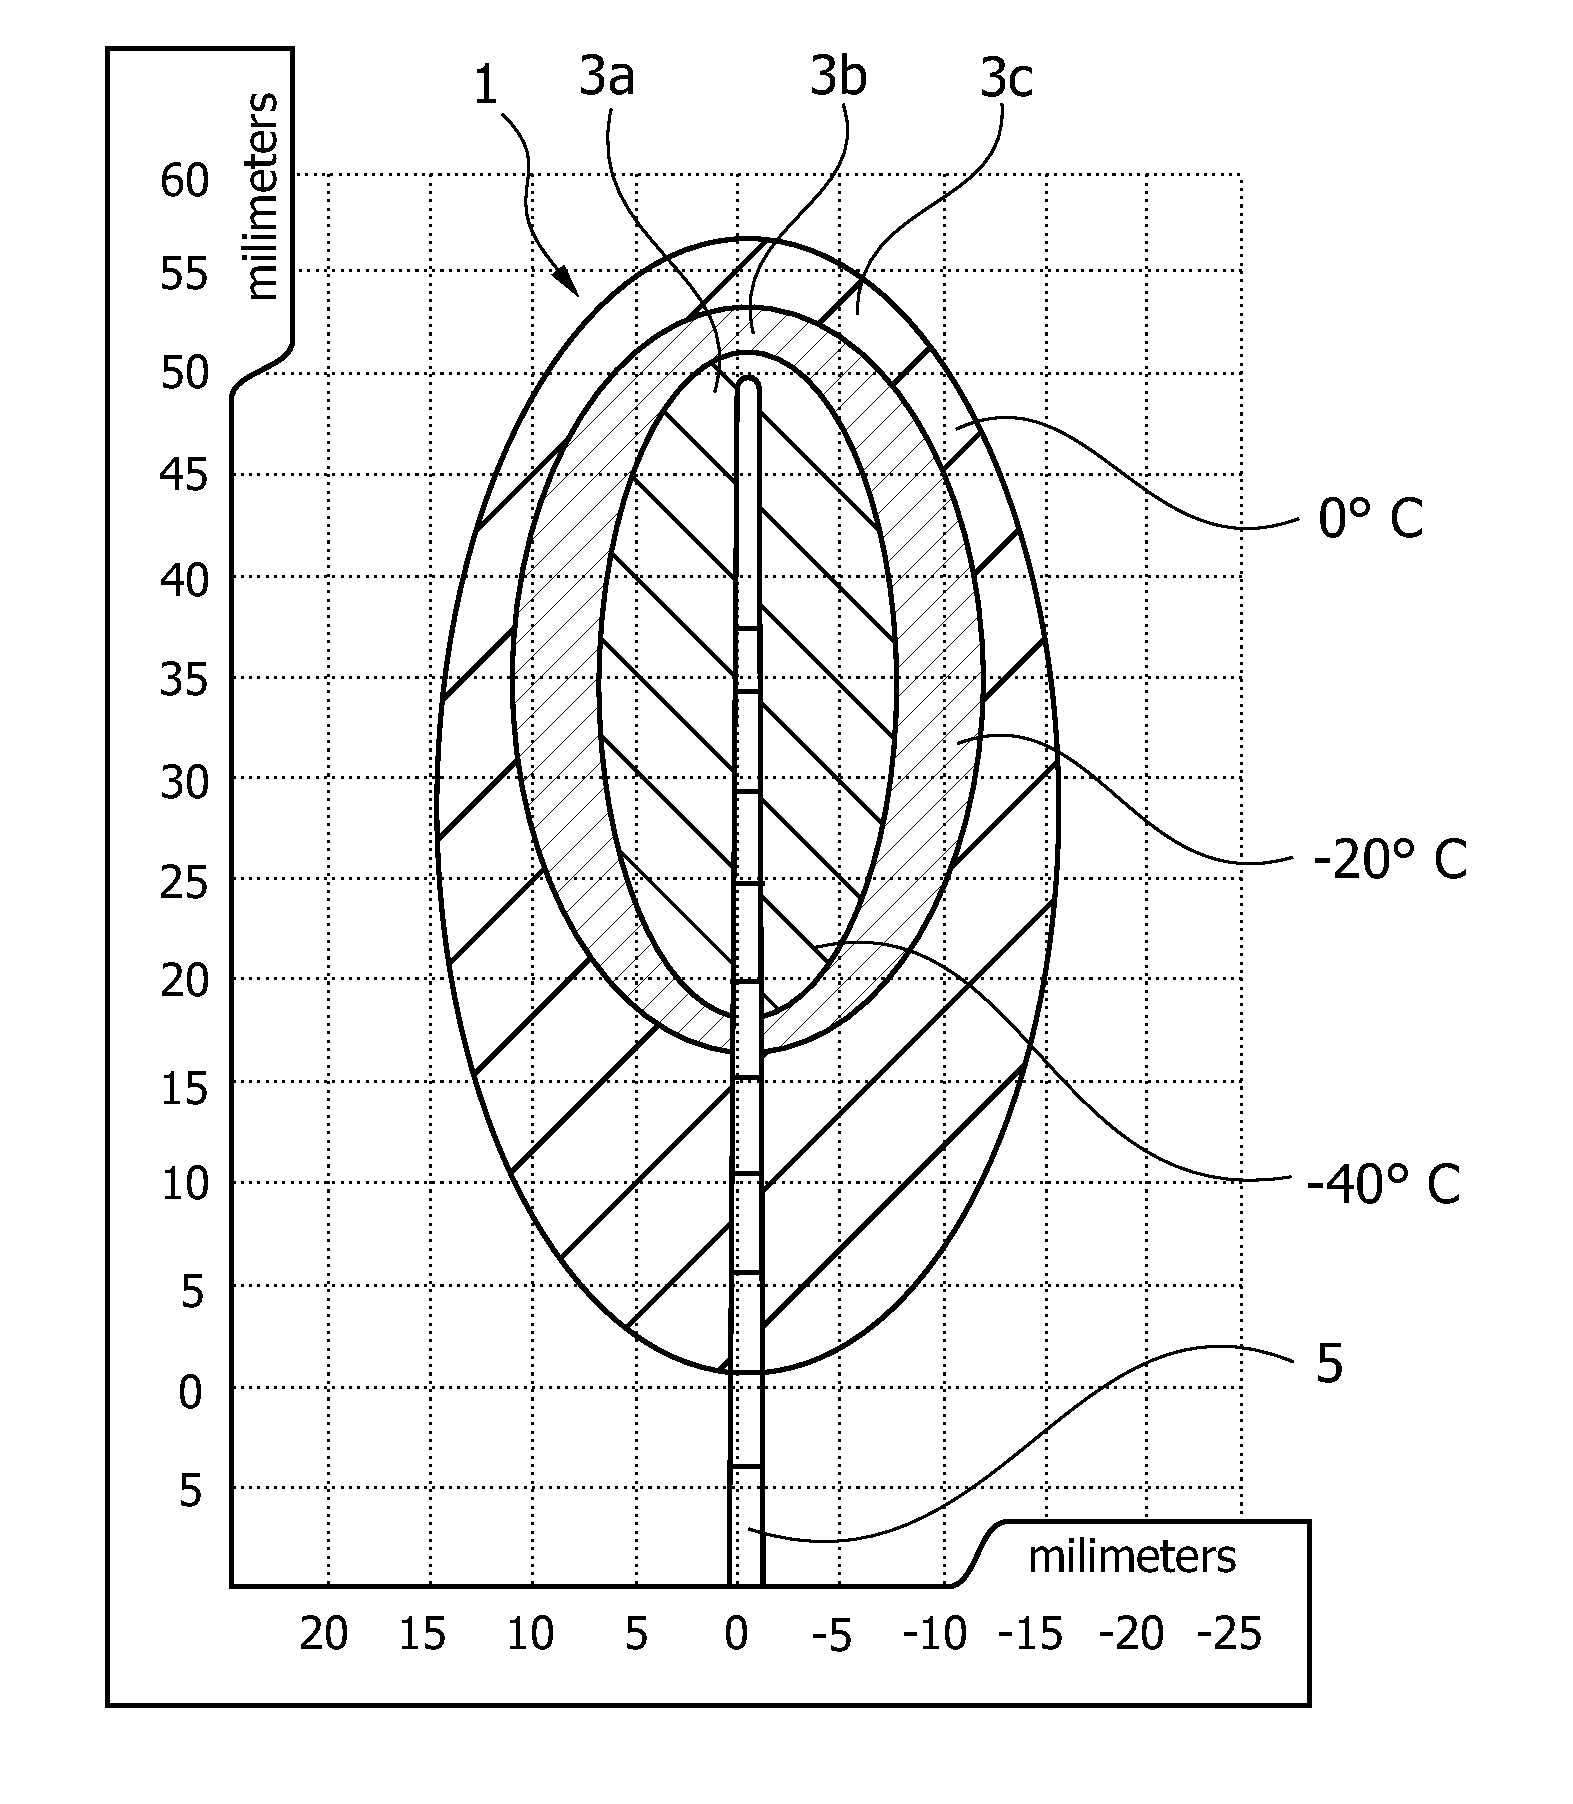 Clipping-plane-based ablation treatment planning